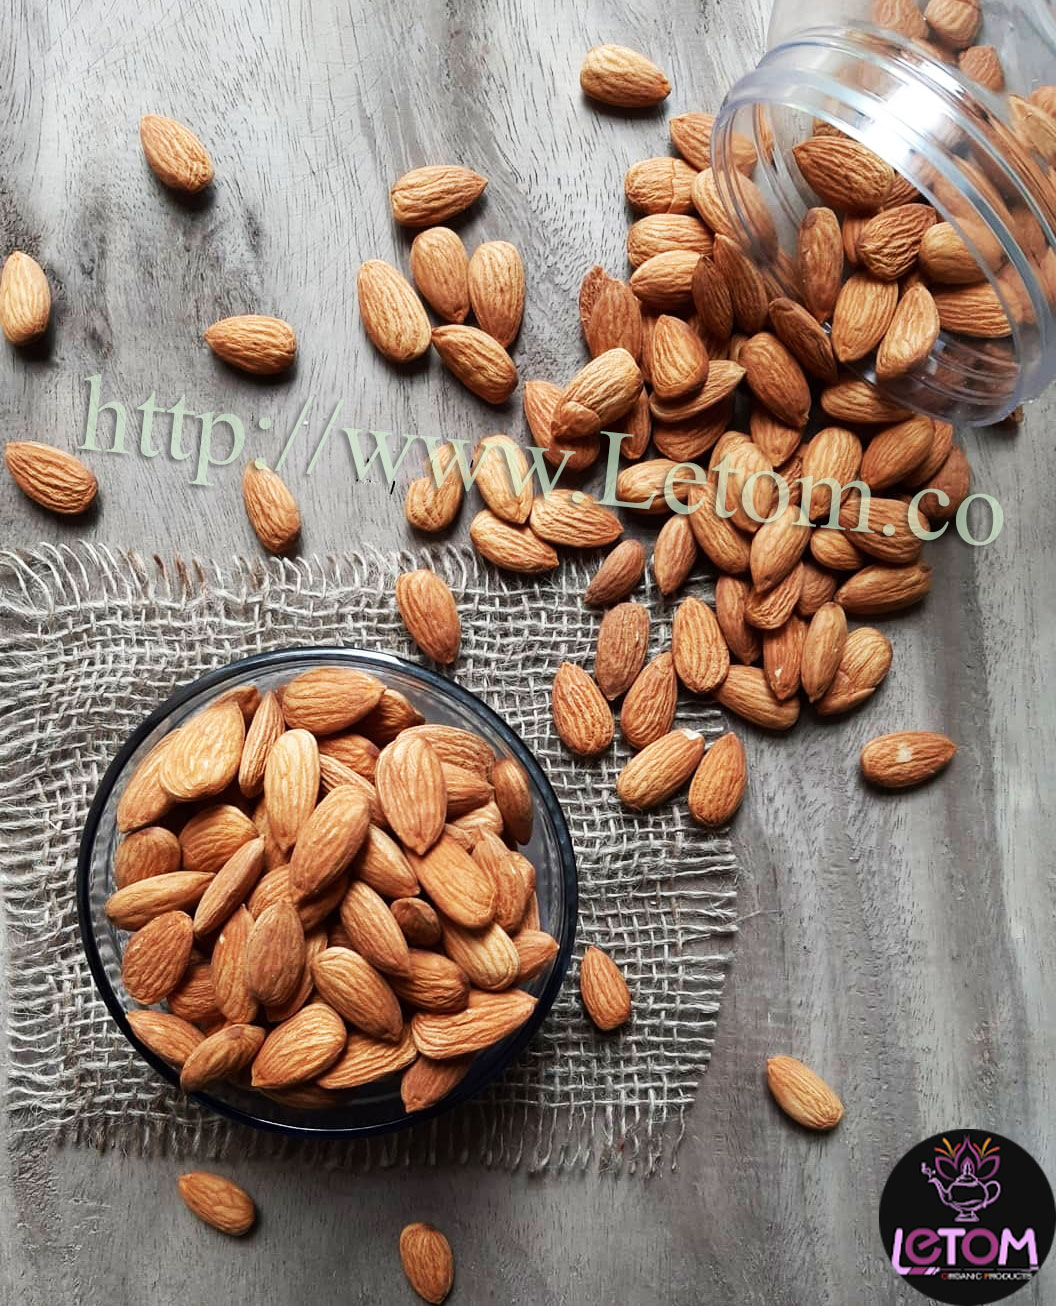 Photos of almonds for mind control and slimming